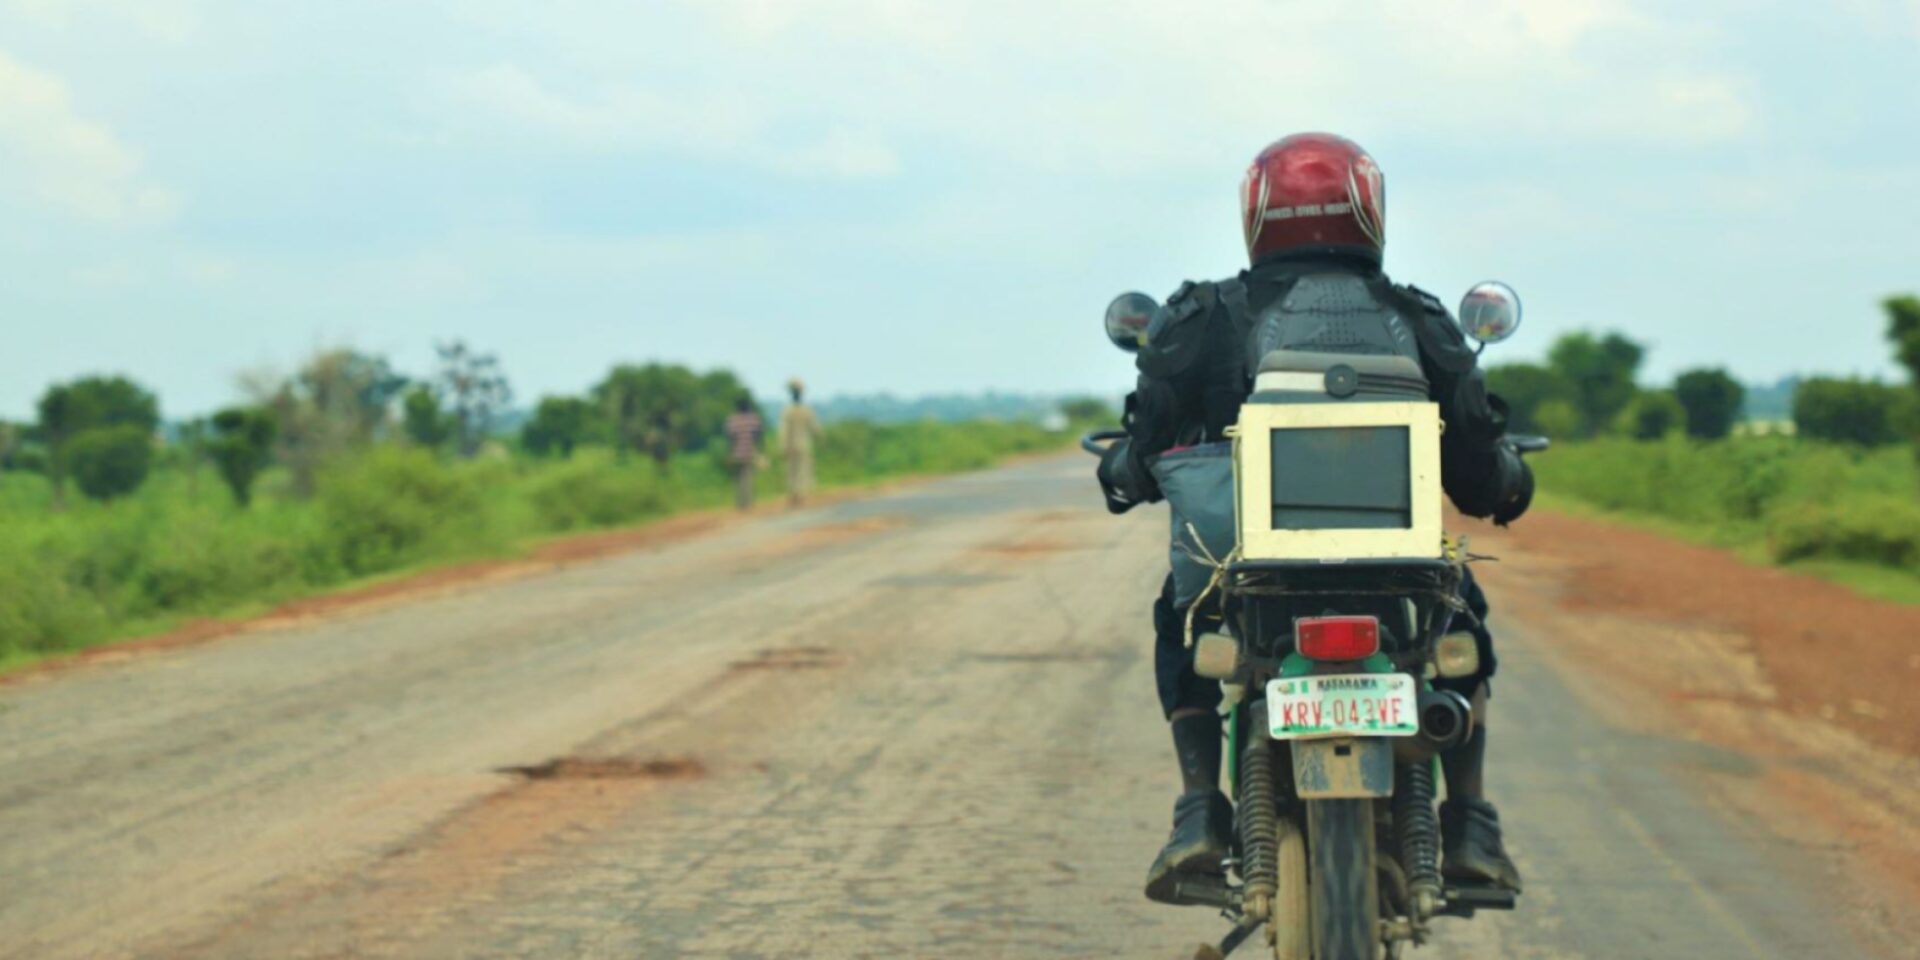 A third party logistics provider uses a motorbike to transport samples across Nigeria.